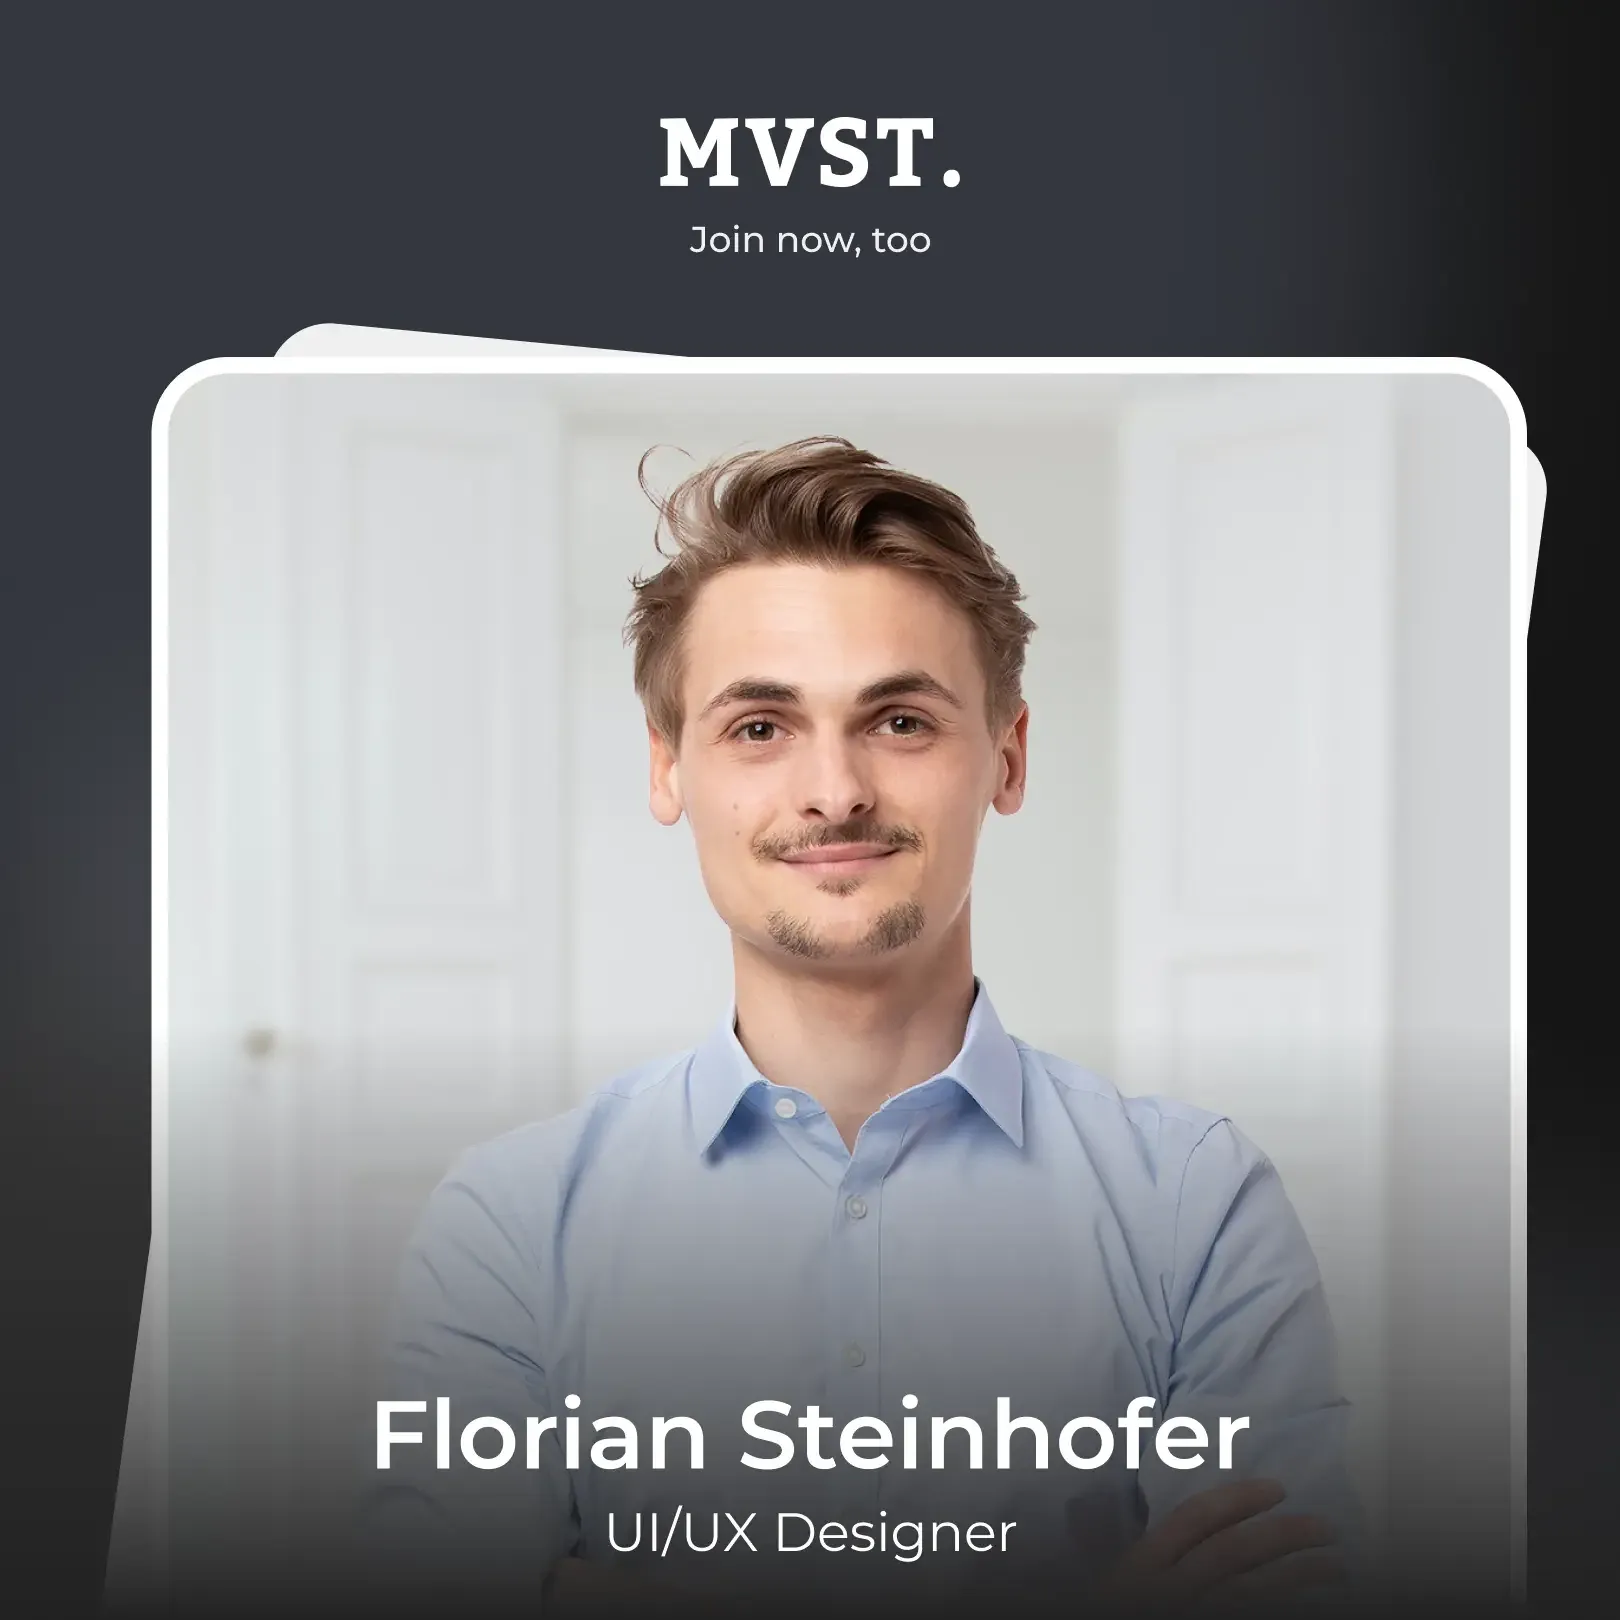 Welcome to MVST, Florian!